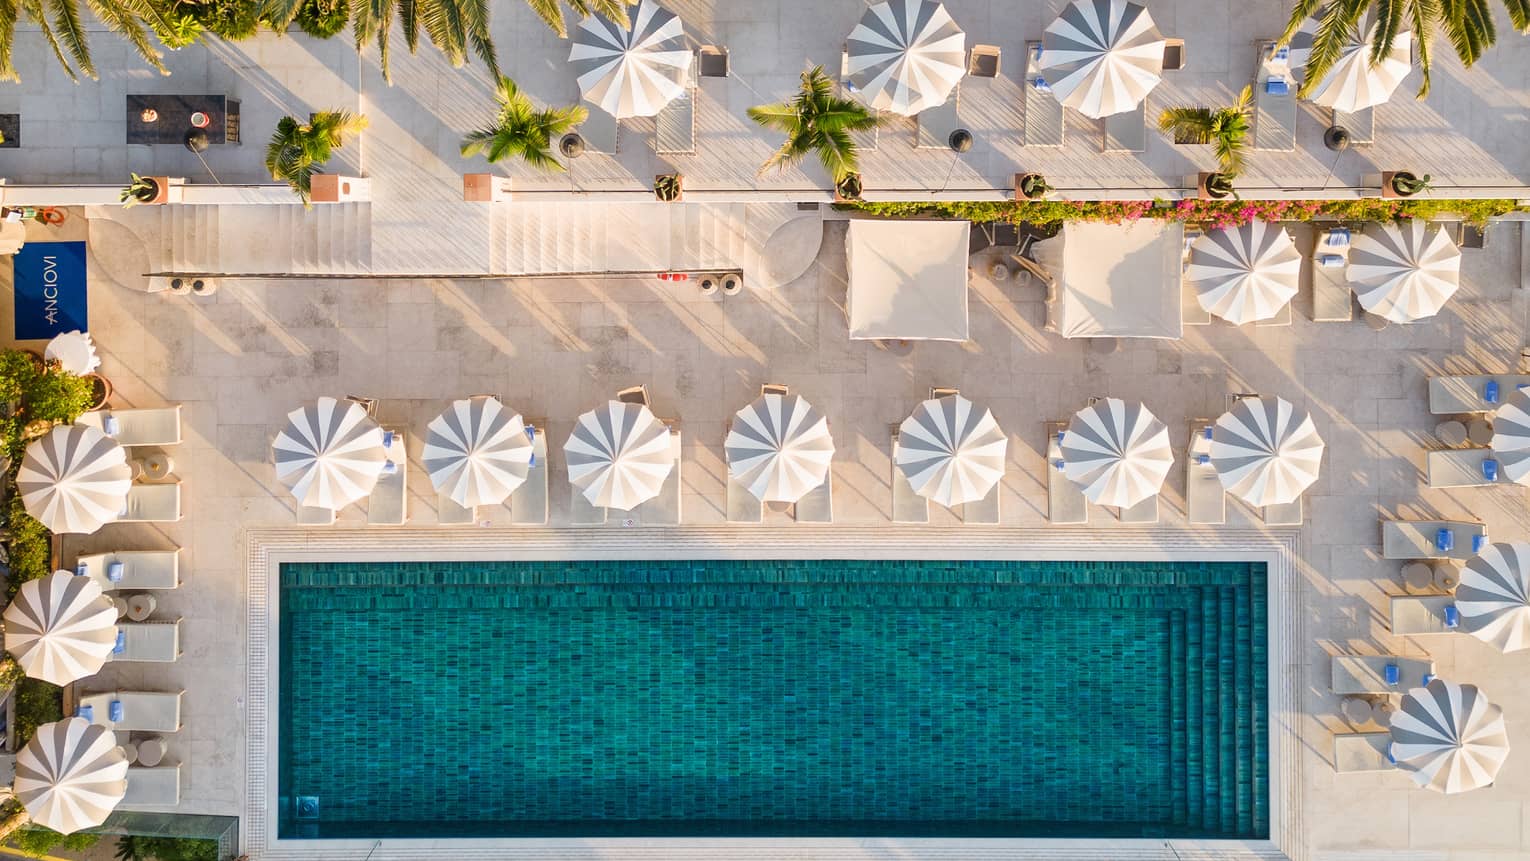 An outdoor pool surrounded by white umbrellas, lounge chairs and palm trees.